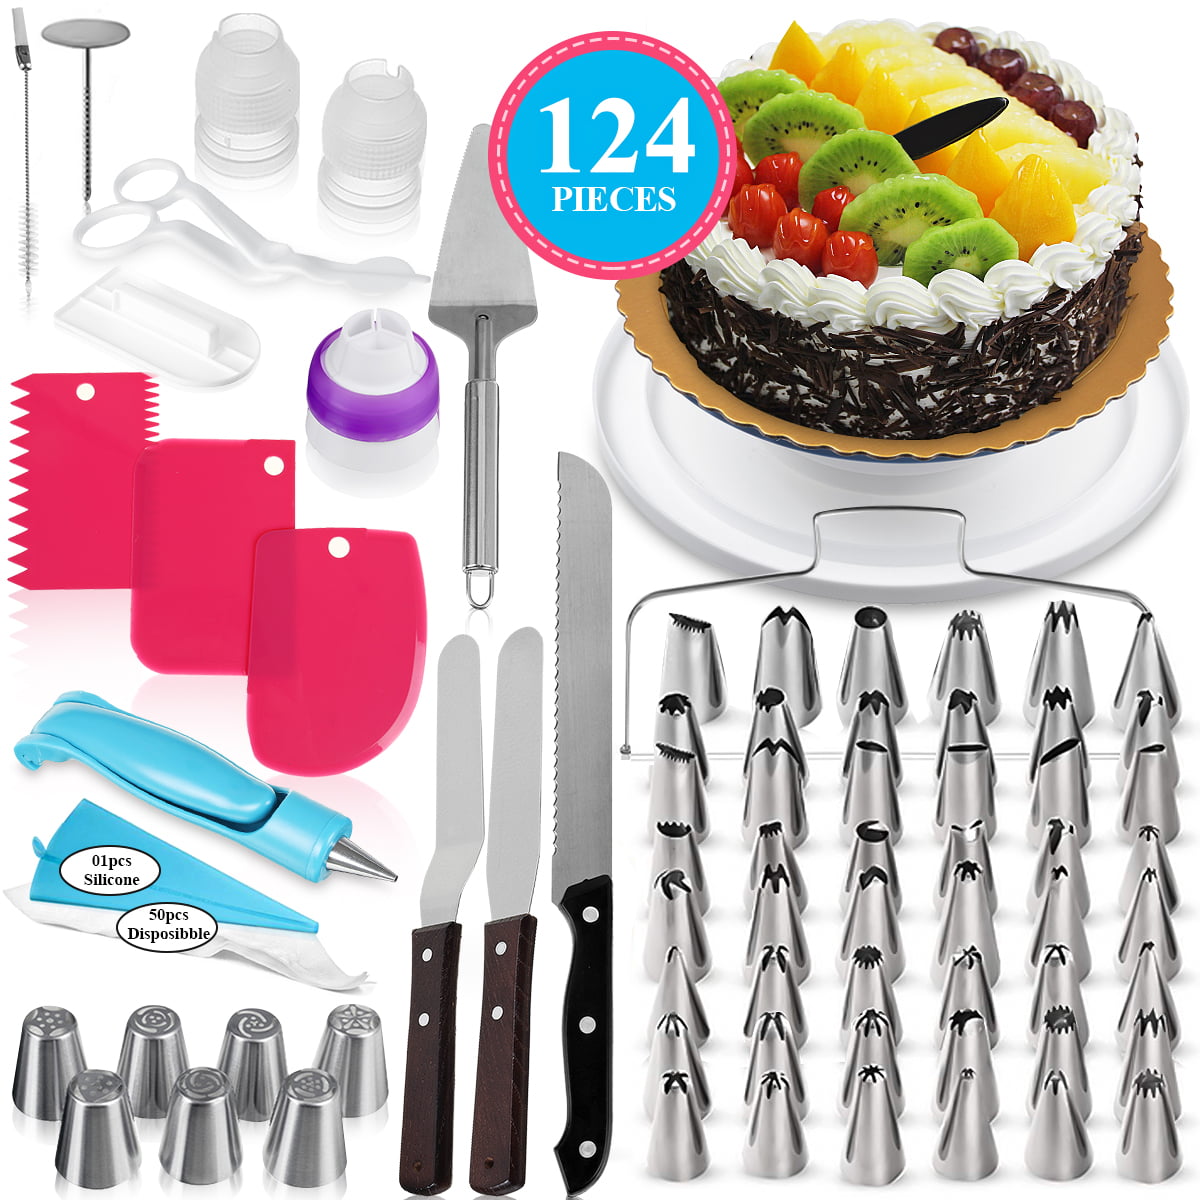 42pcs Cake Decorating Tools Kit Turntable Icing Tips Nozzles Pastry Supplies Set